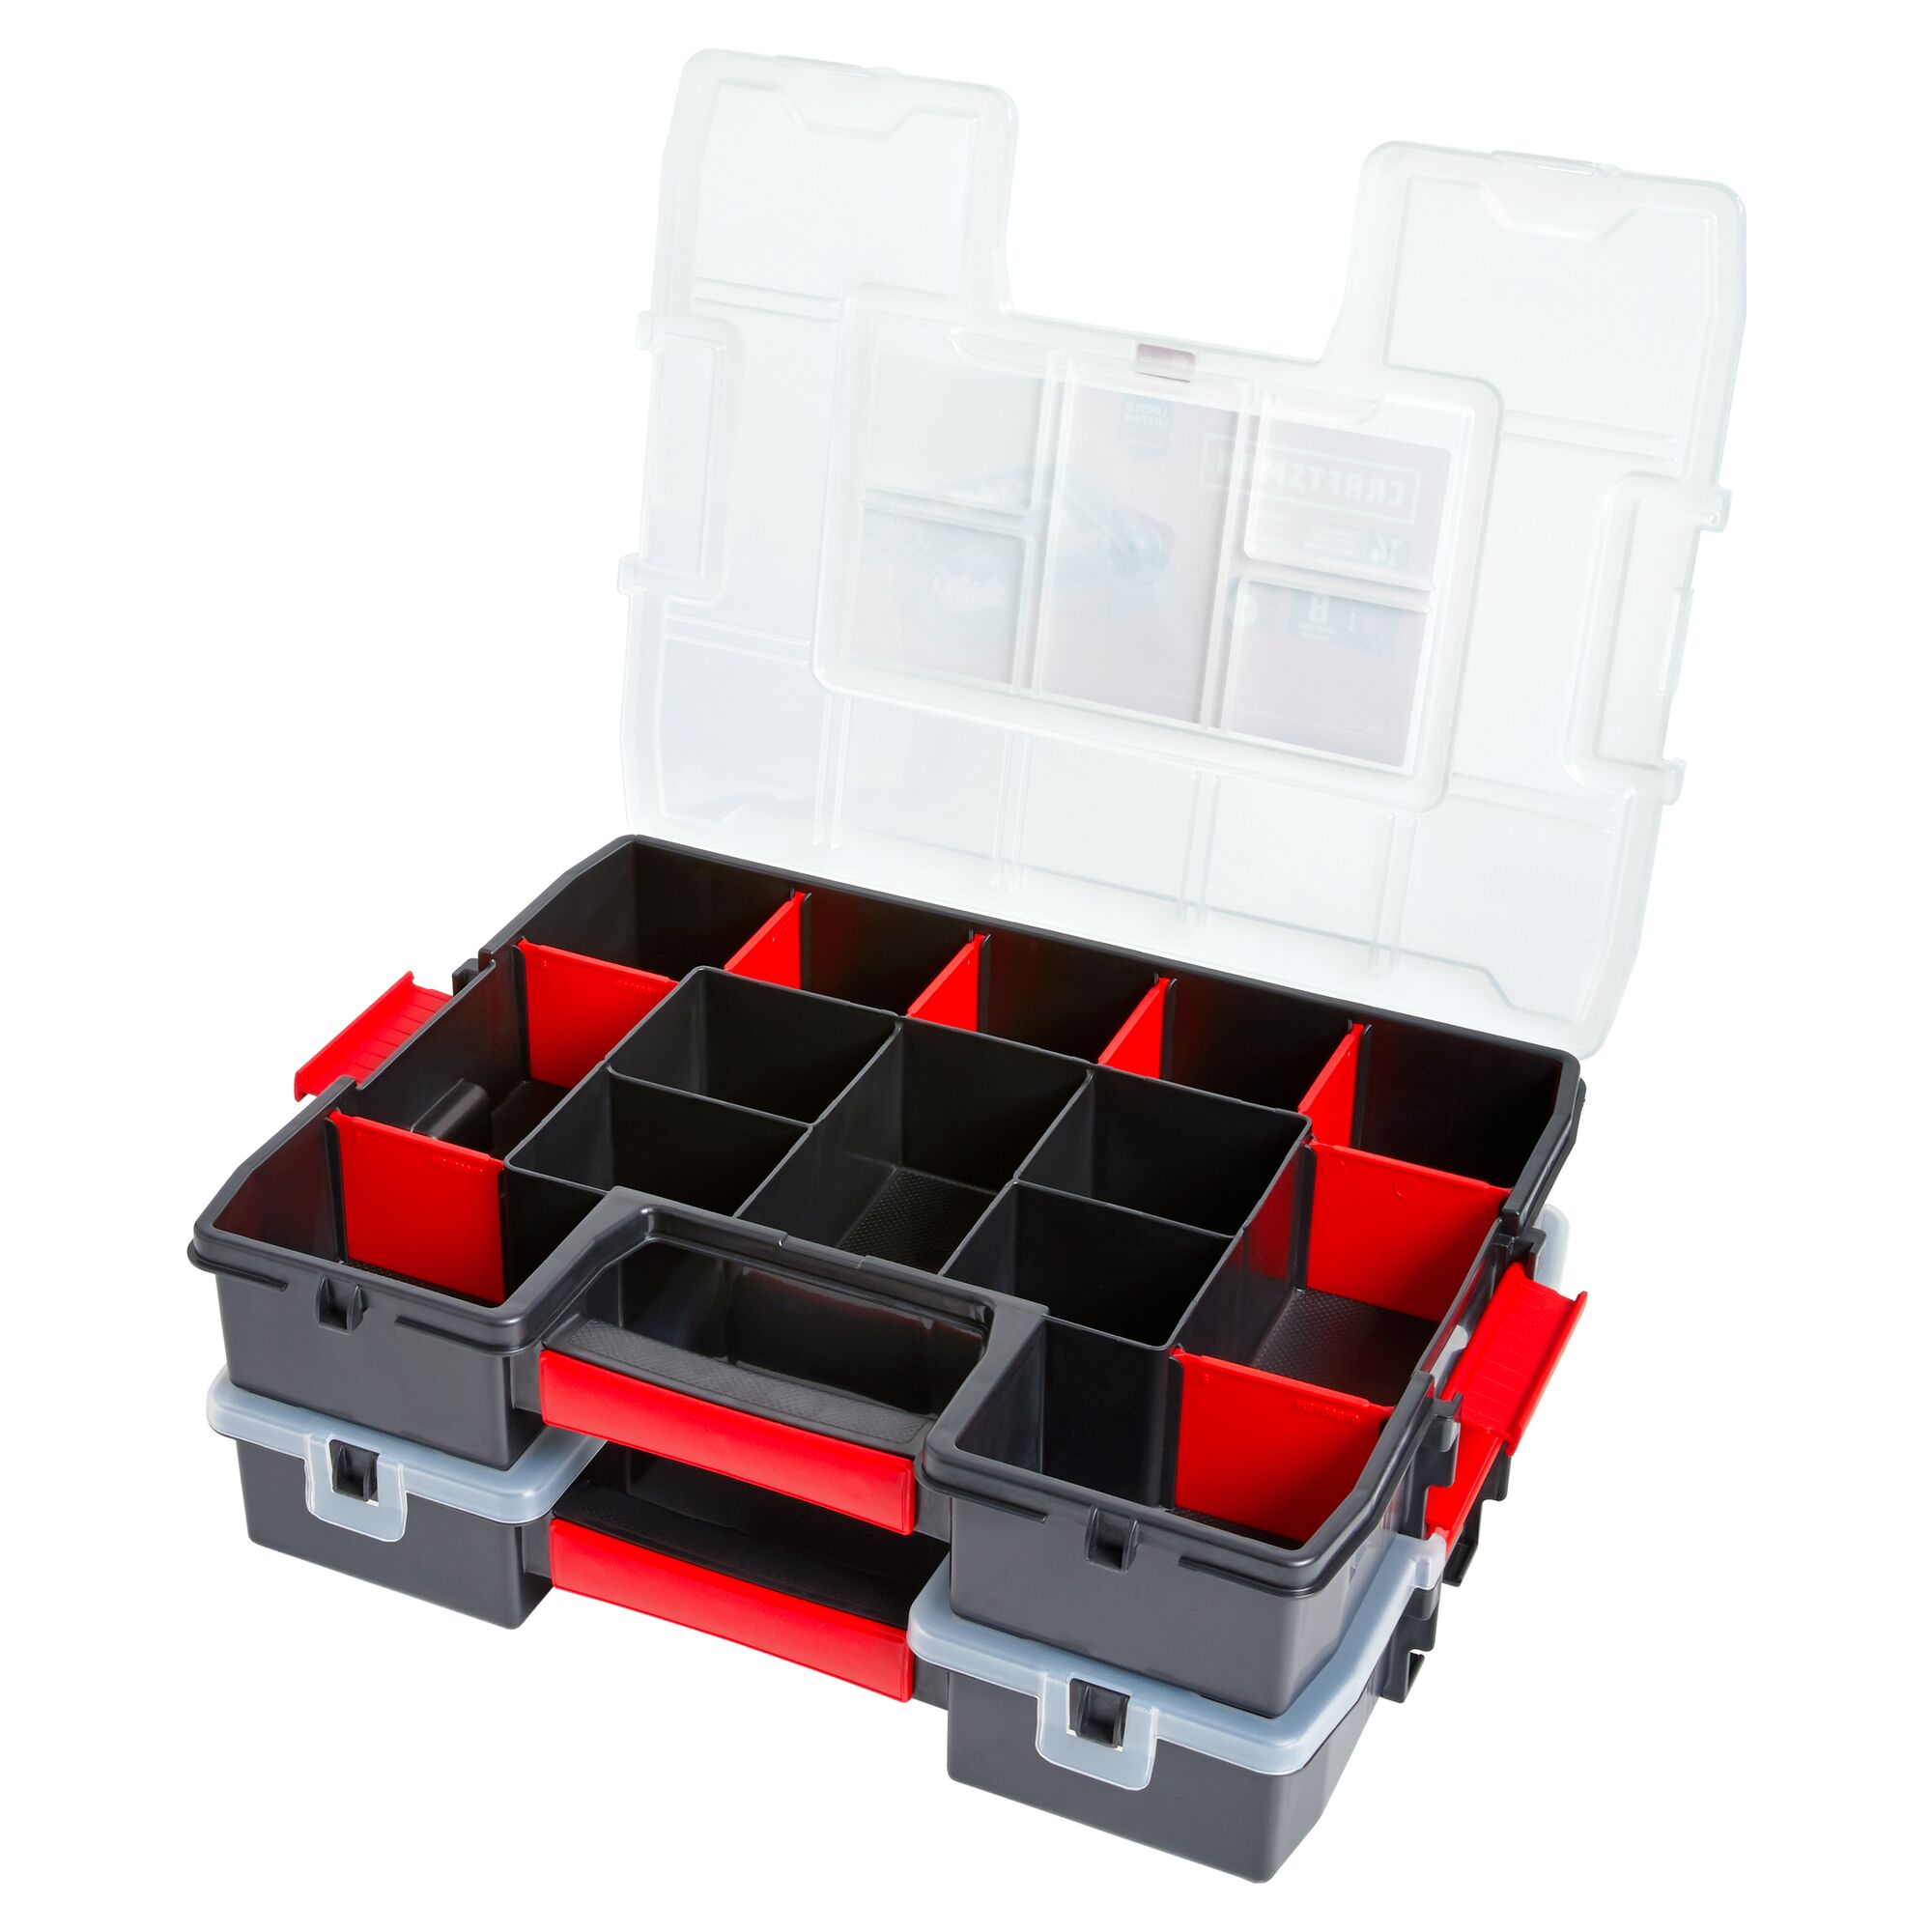 Profile of 2 Pack 14 Compartment Plastic Small Parts Organizers with lid open.